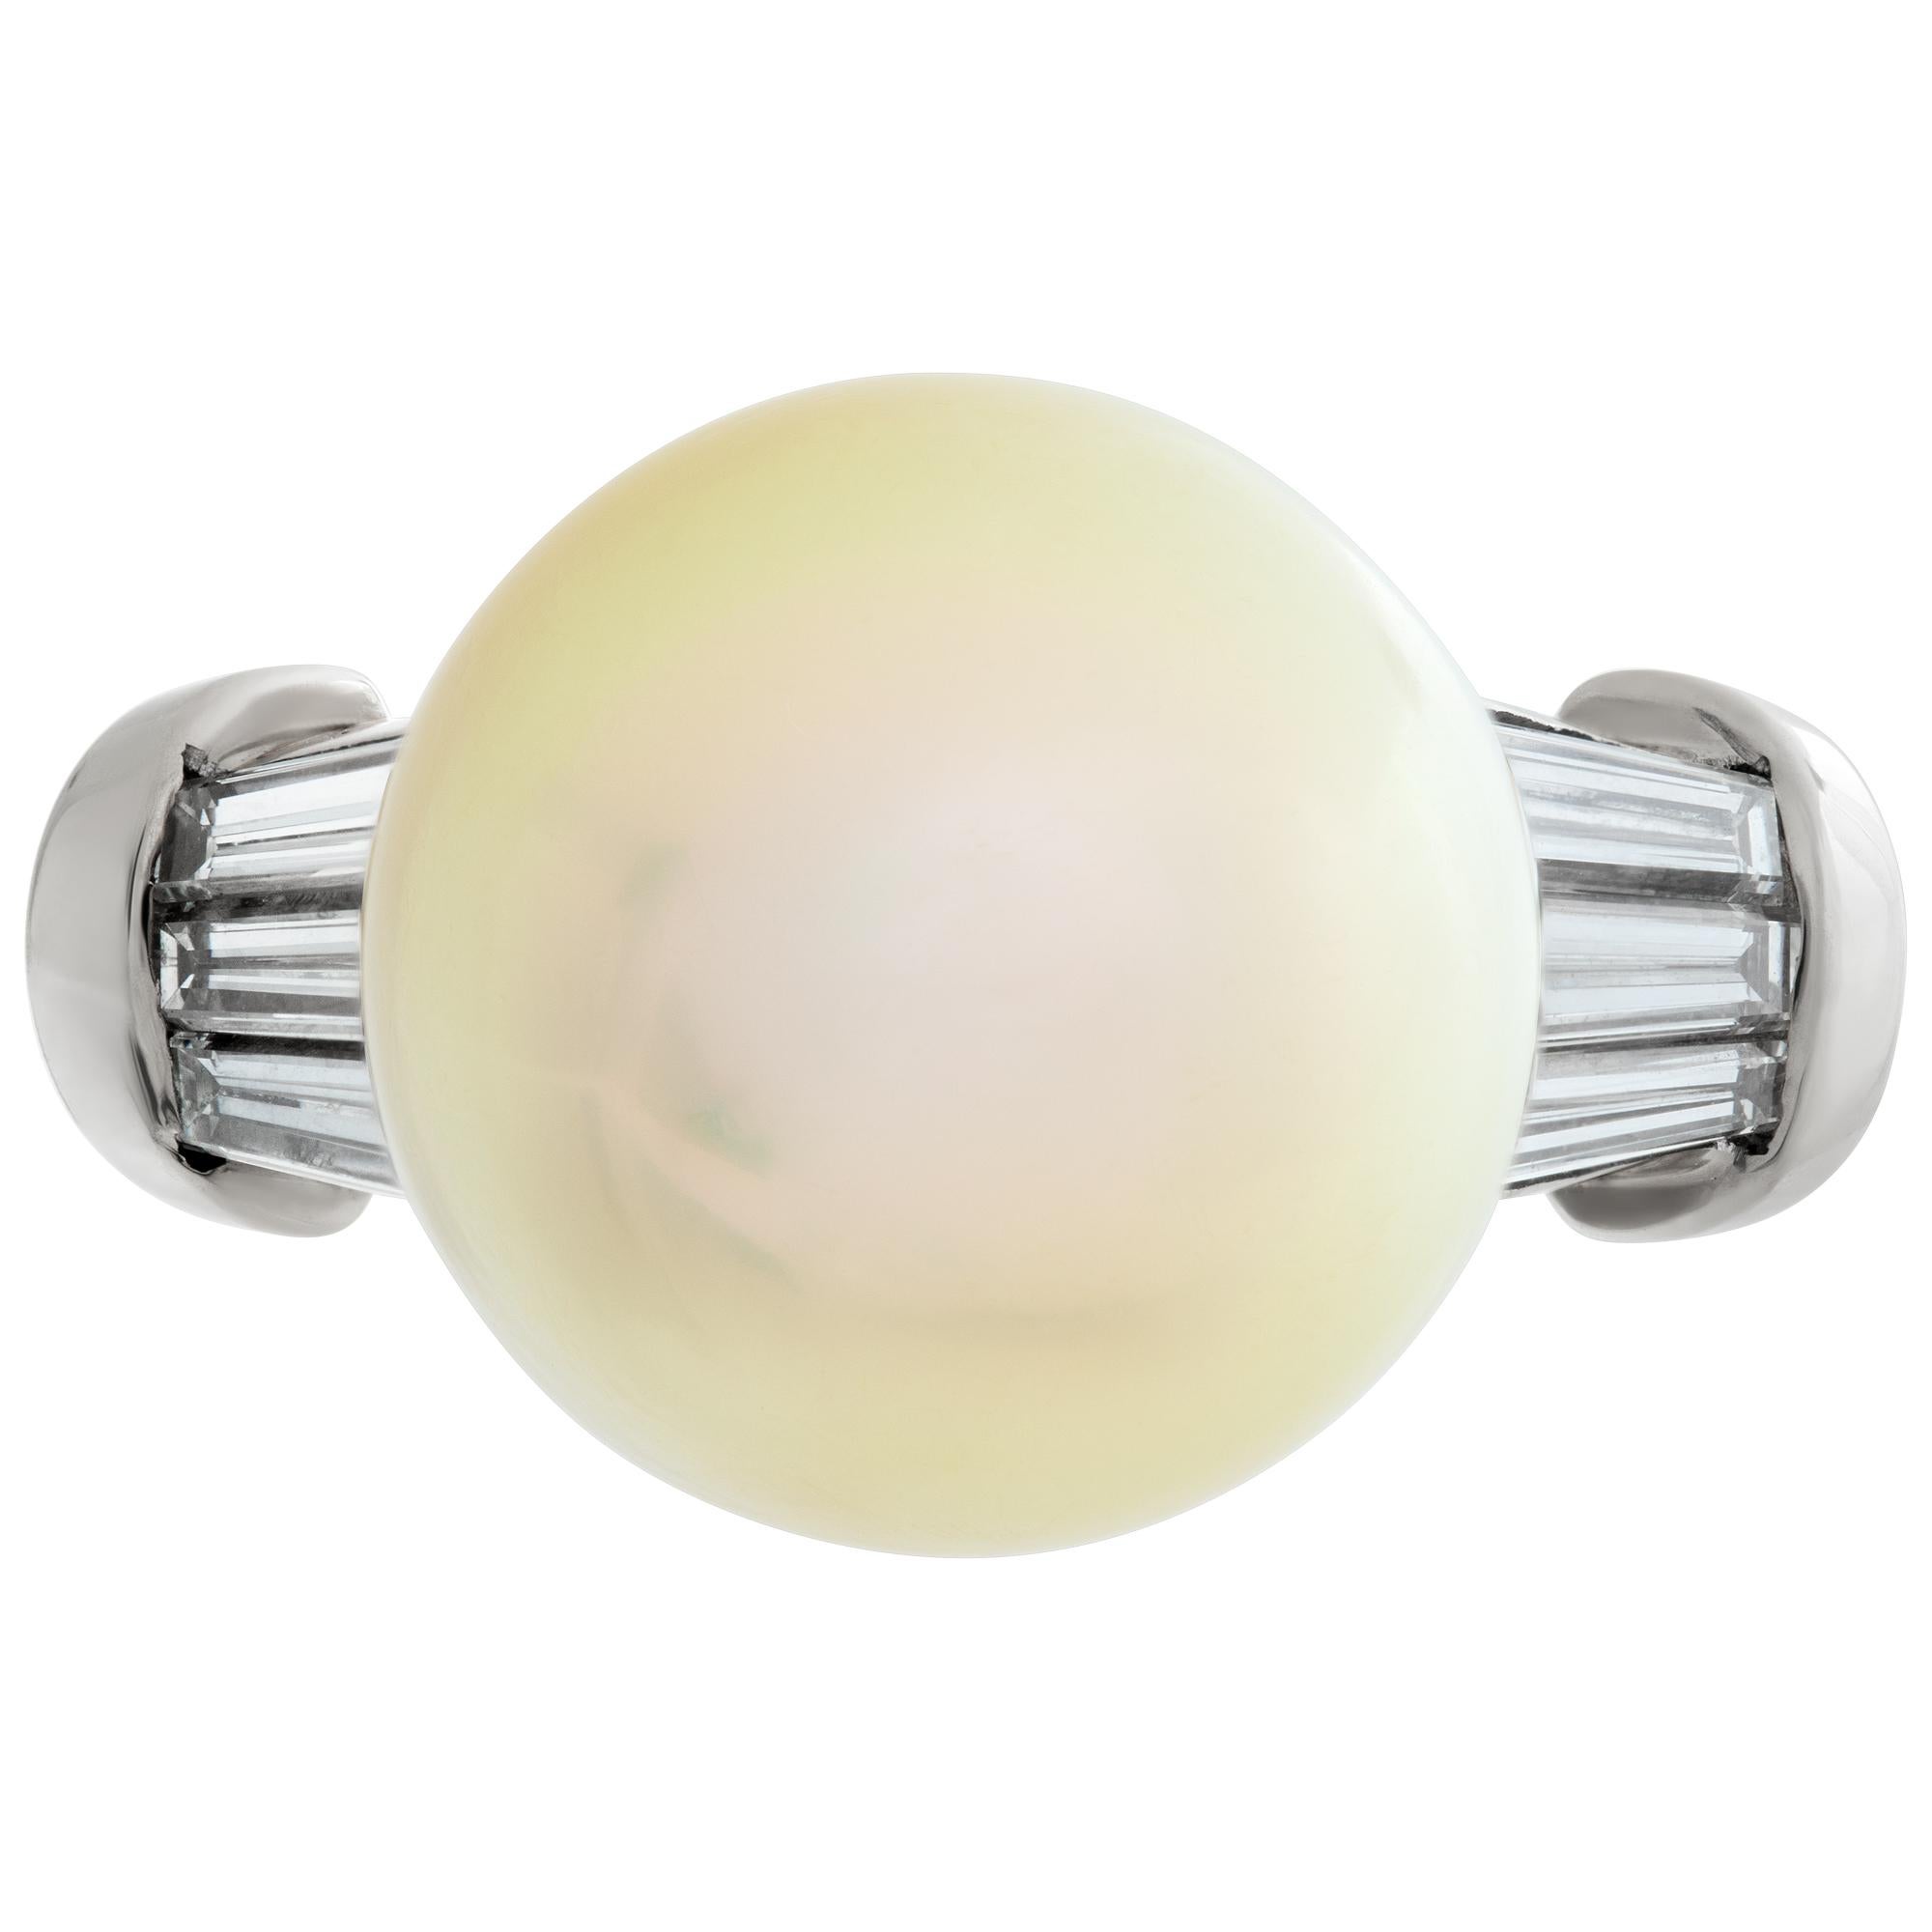 Golden South Sea pearl (13x 13.5mm) and tapered baguette diamonds ring set in 18K gold. Total baguette diamonds approx.weight: 0.90 carat. Size 7.This Pearl/diamond ring is currently size 7 and some items can be sized up or down, please ask! It